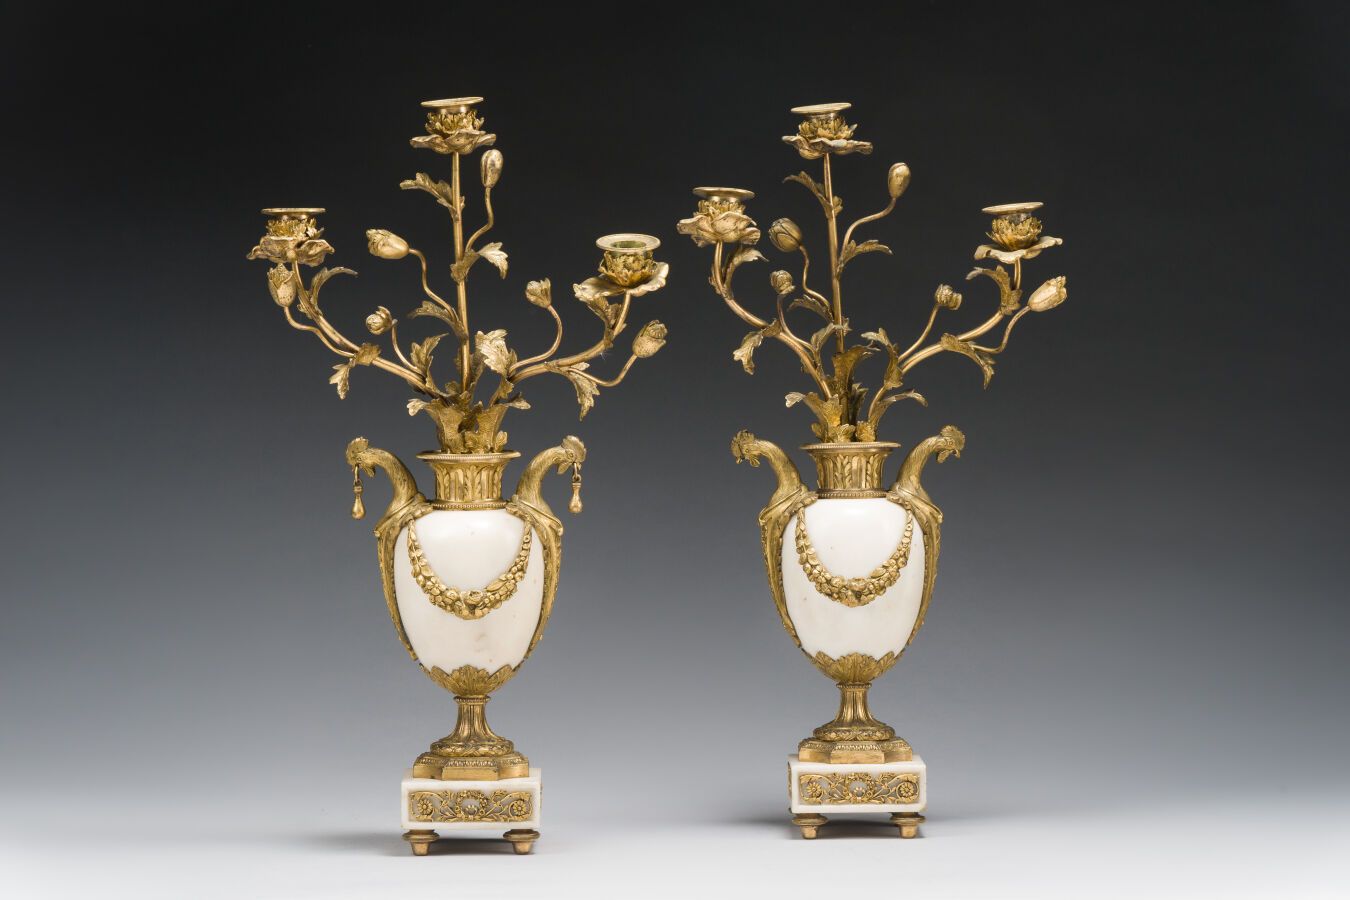 Null 141. Pair of candelabras in white marble and
gilt bronze with three arms of&hellip;